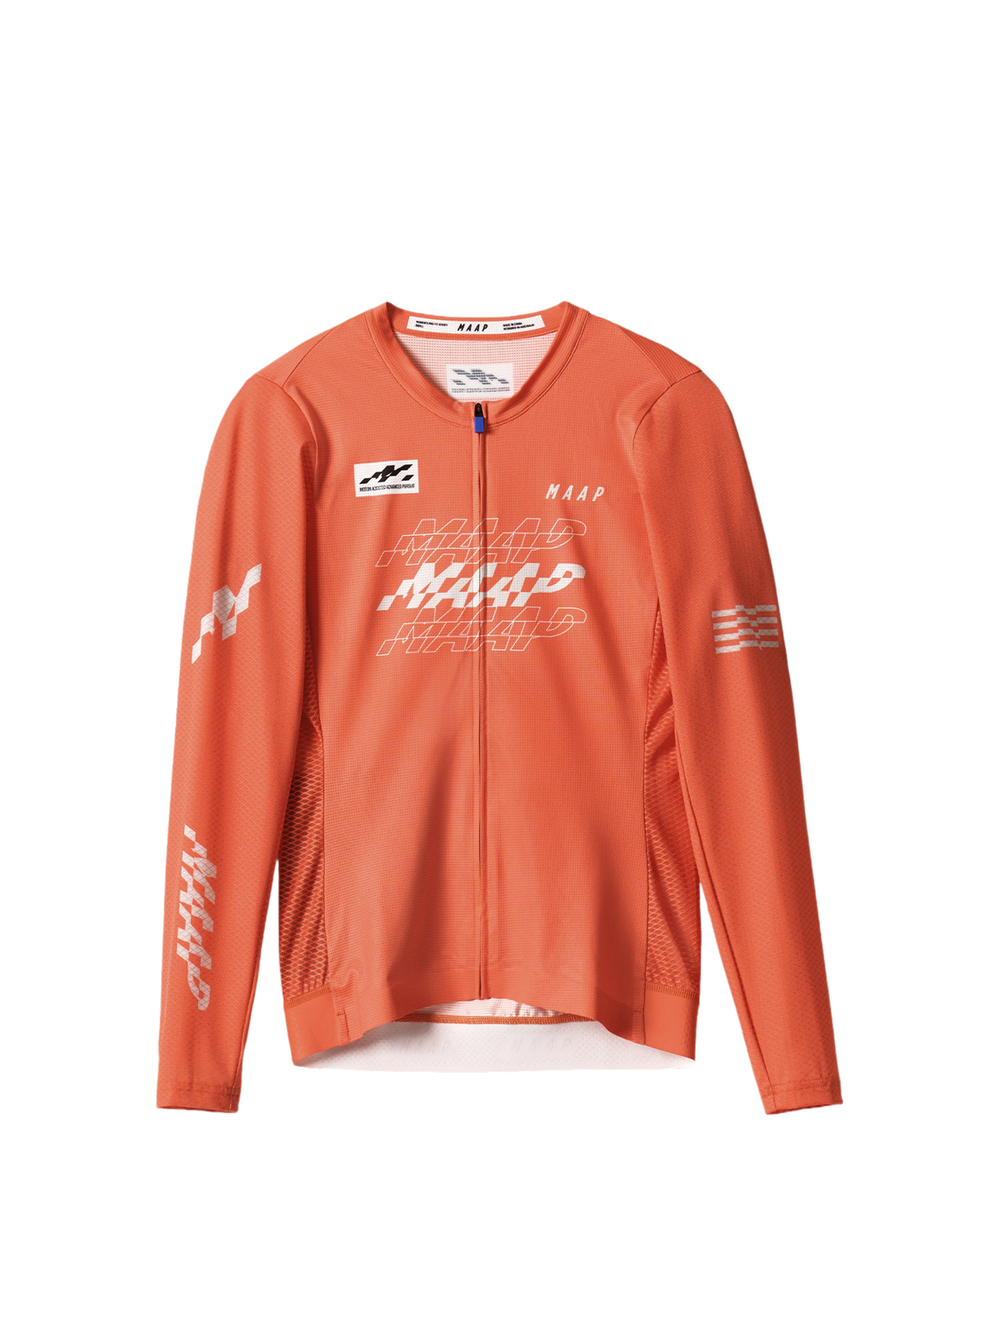 Product Image for Women's Fragment Pro Air LS Jersey 2.0